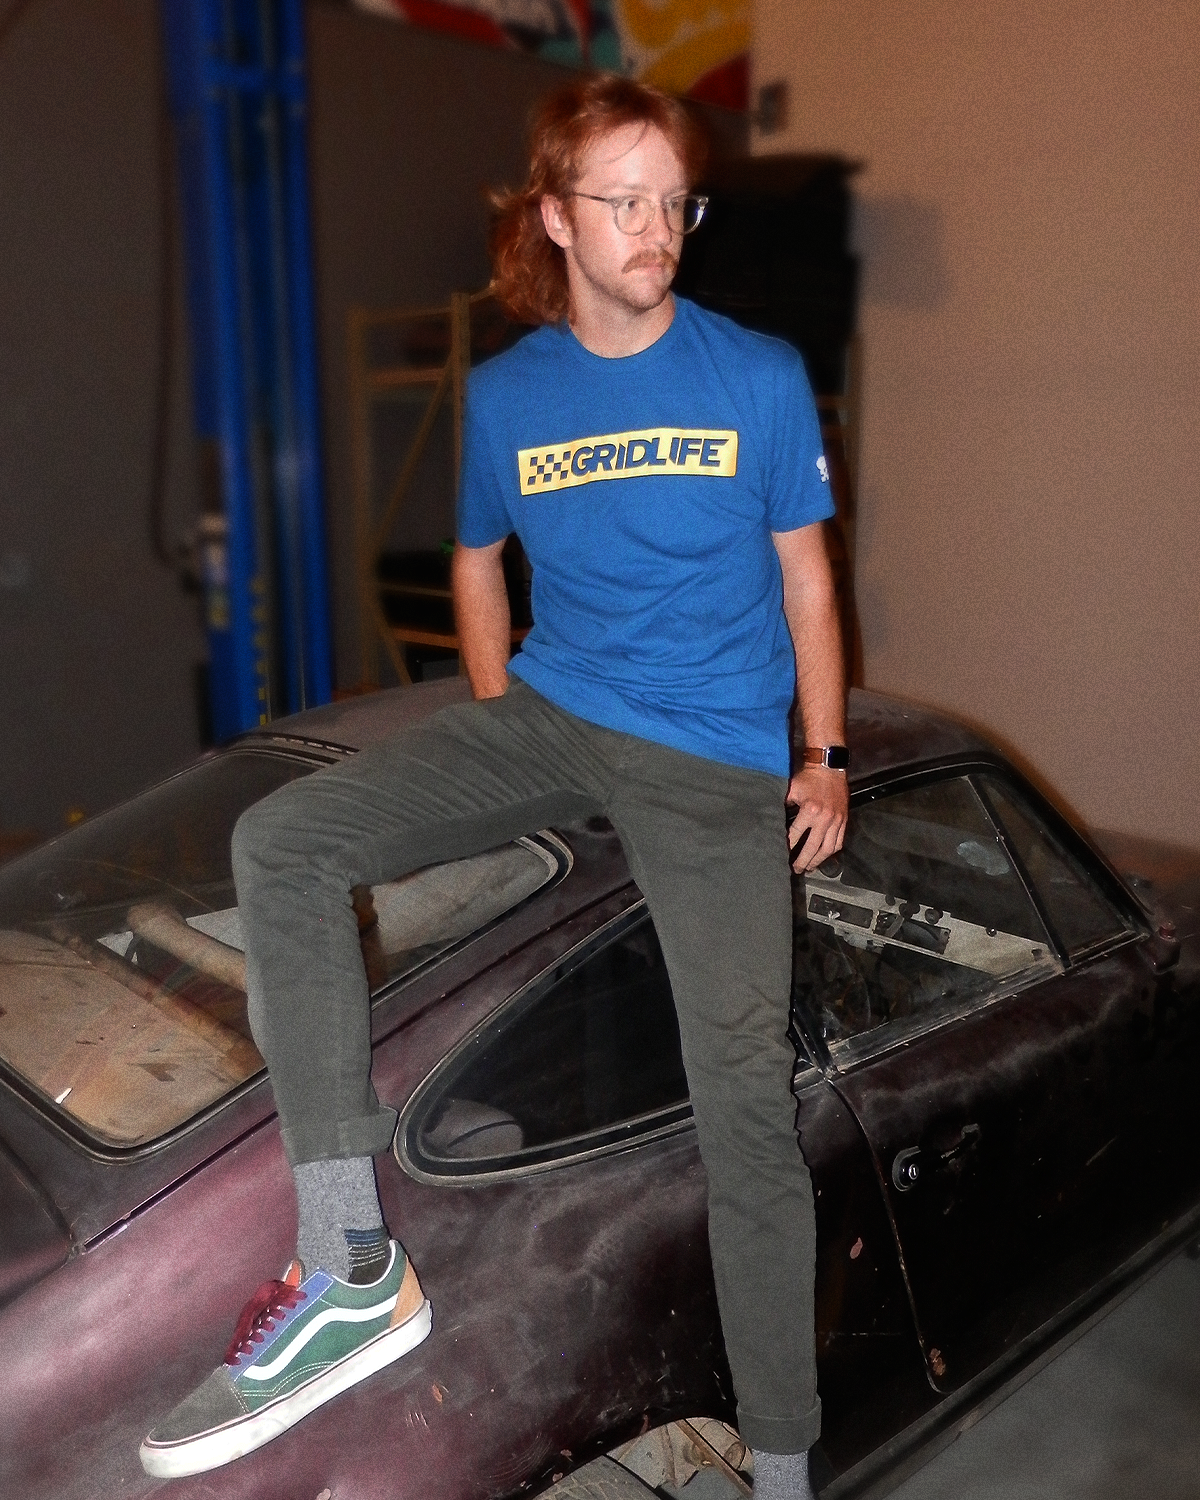 GRIDLIFE blue flag logo t shirt being worn on top of rusty old no good 911